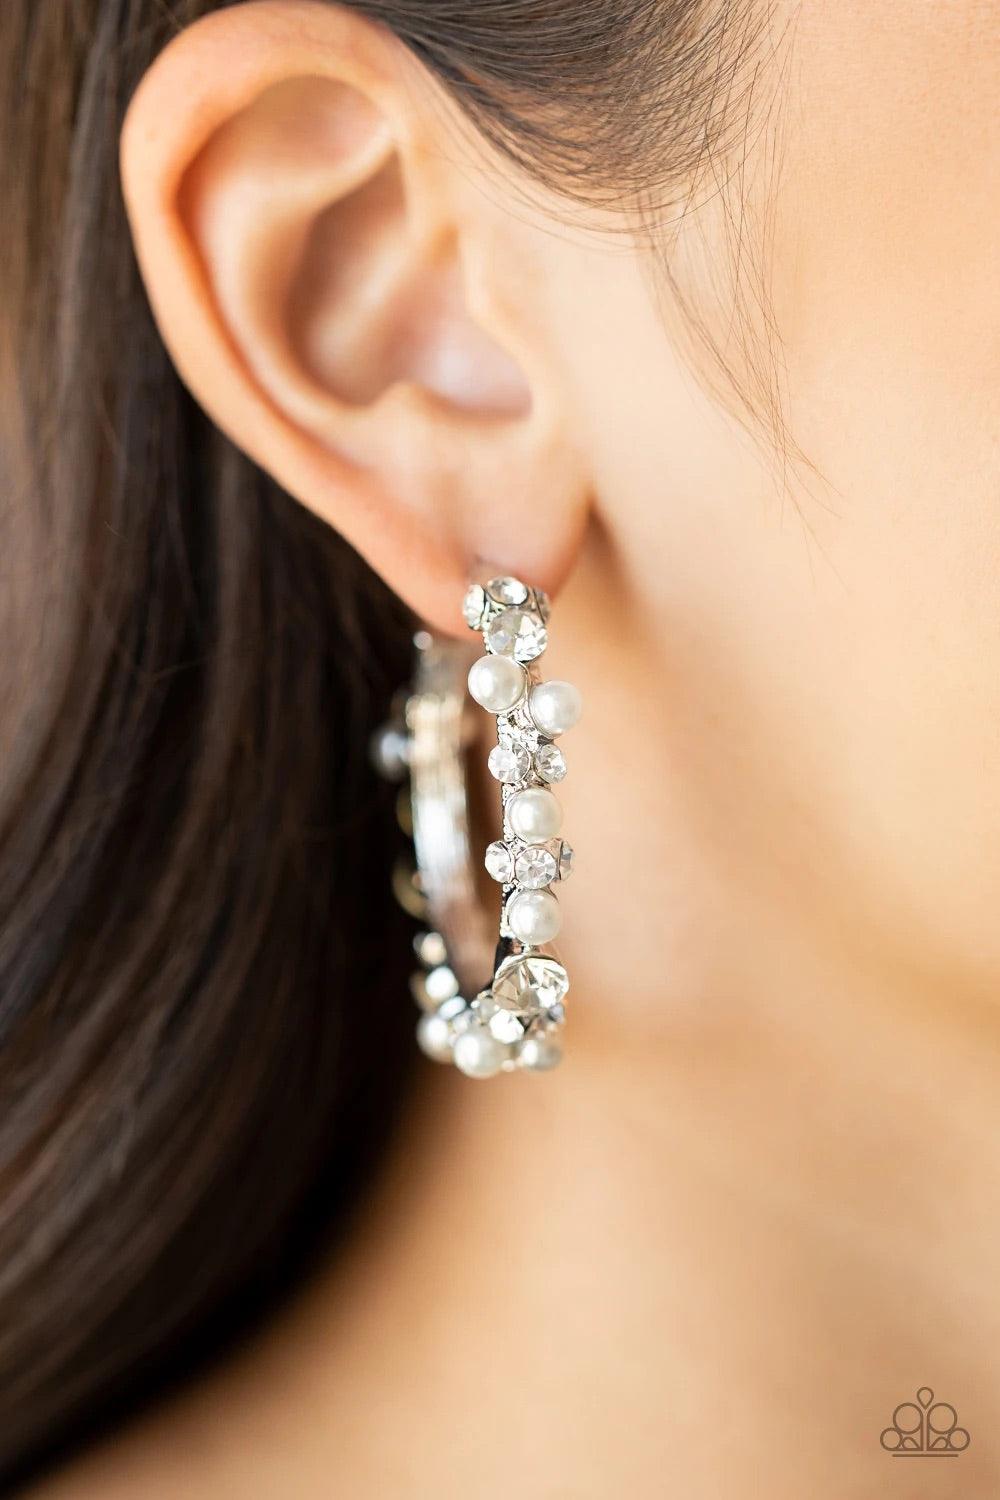 Paparazzi Accessories Let There Be Socialite - White A bubbly array of classic white rhinestones and glassy white rhinestones are encrusted along the front of a silver hoop, creating an elegantly effervescent look. Earring attaches to a standard post fitt